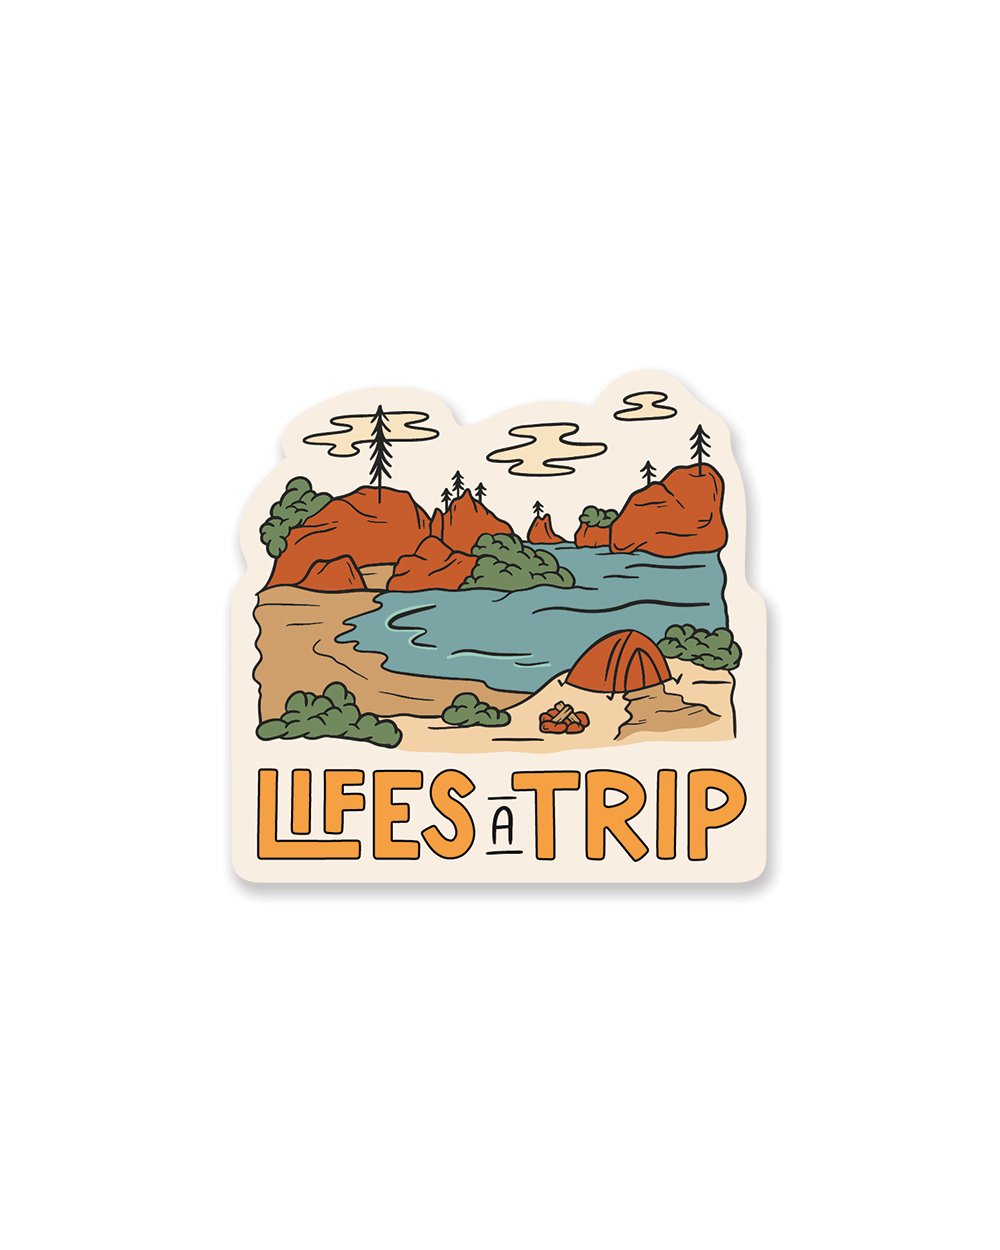 Life's a trip lake scene sticker by Keep Nature Wild